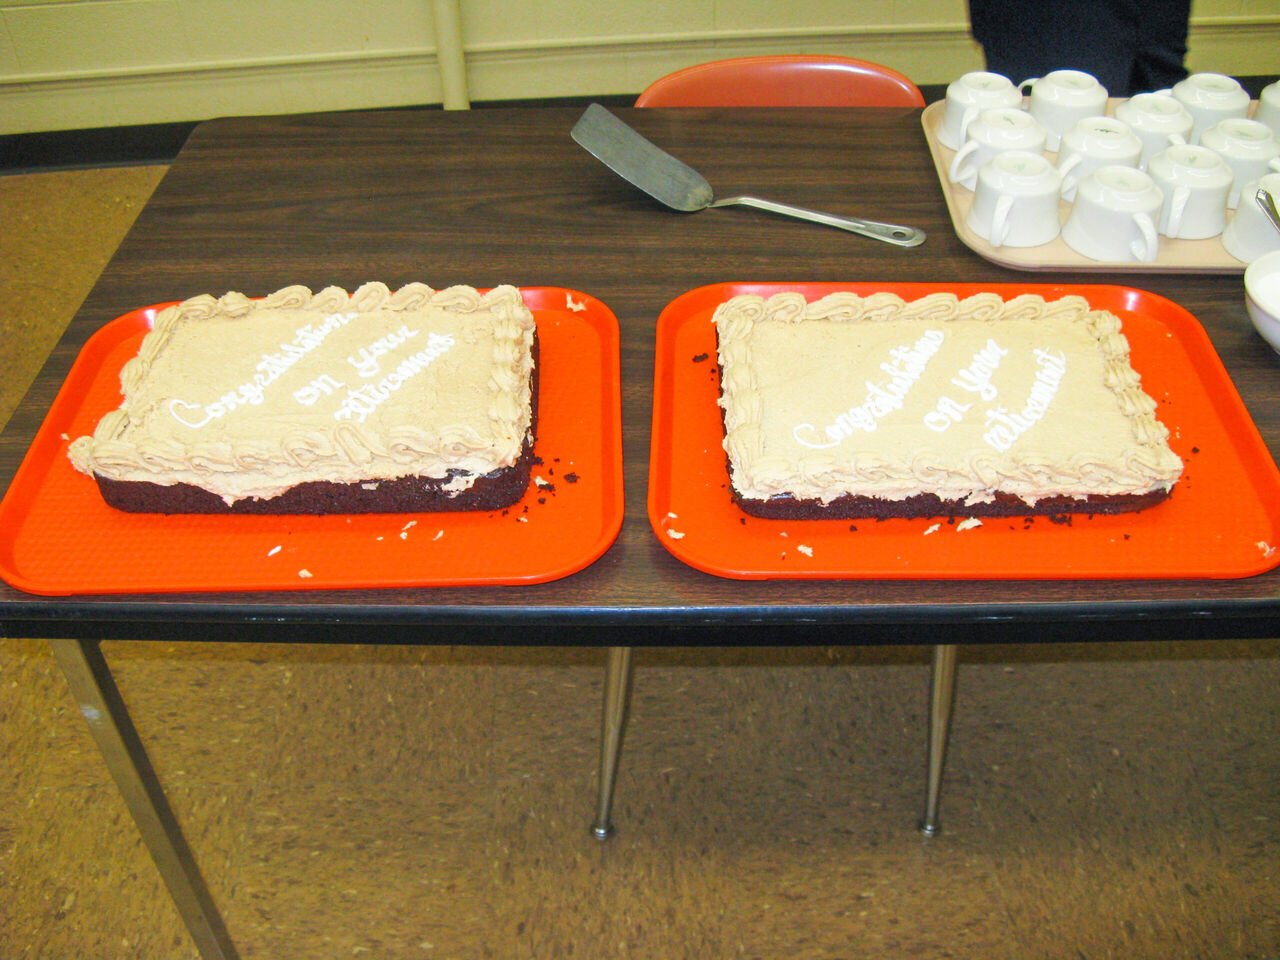 Mrs. Sharer's retirement party cake, baked my Food Service instructor Justin Wright